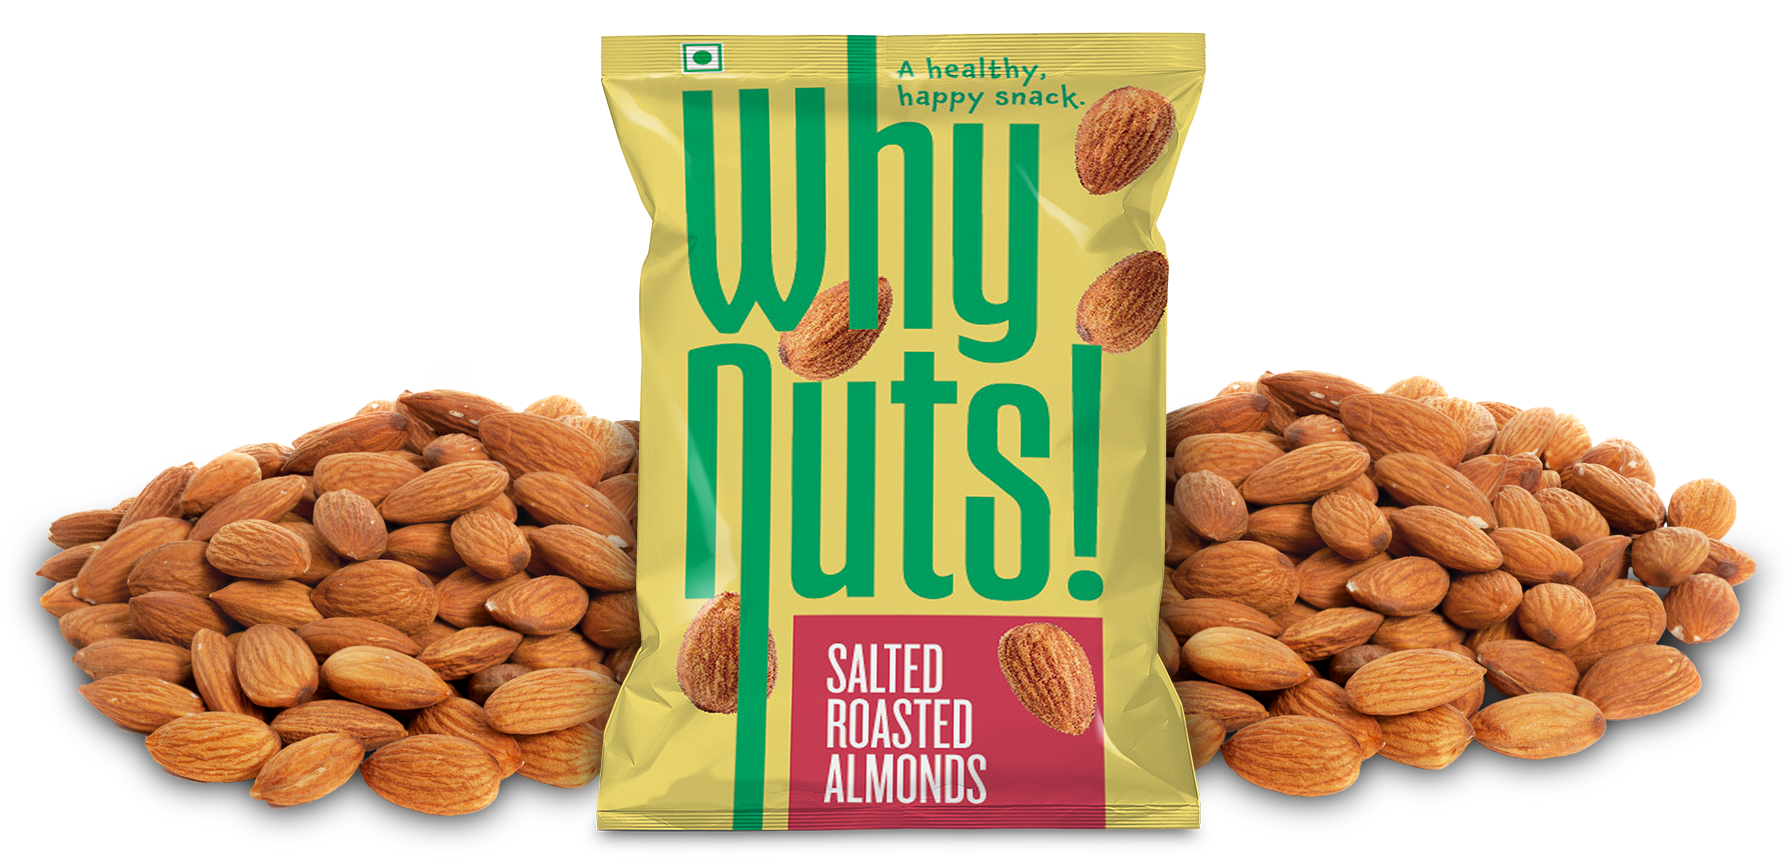 Salted Roasted Almonds